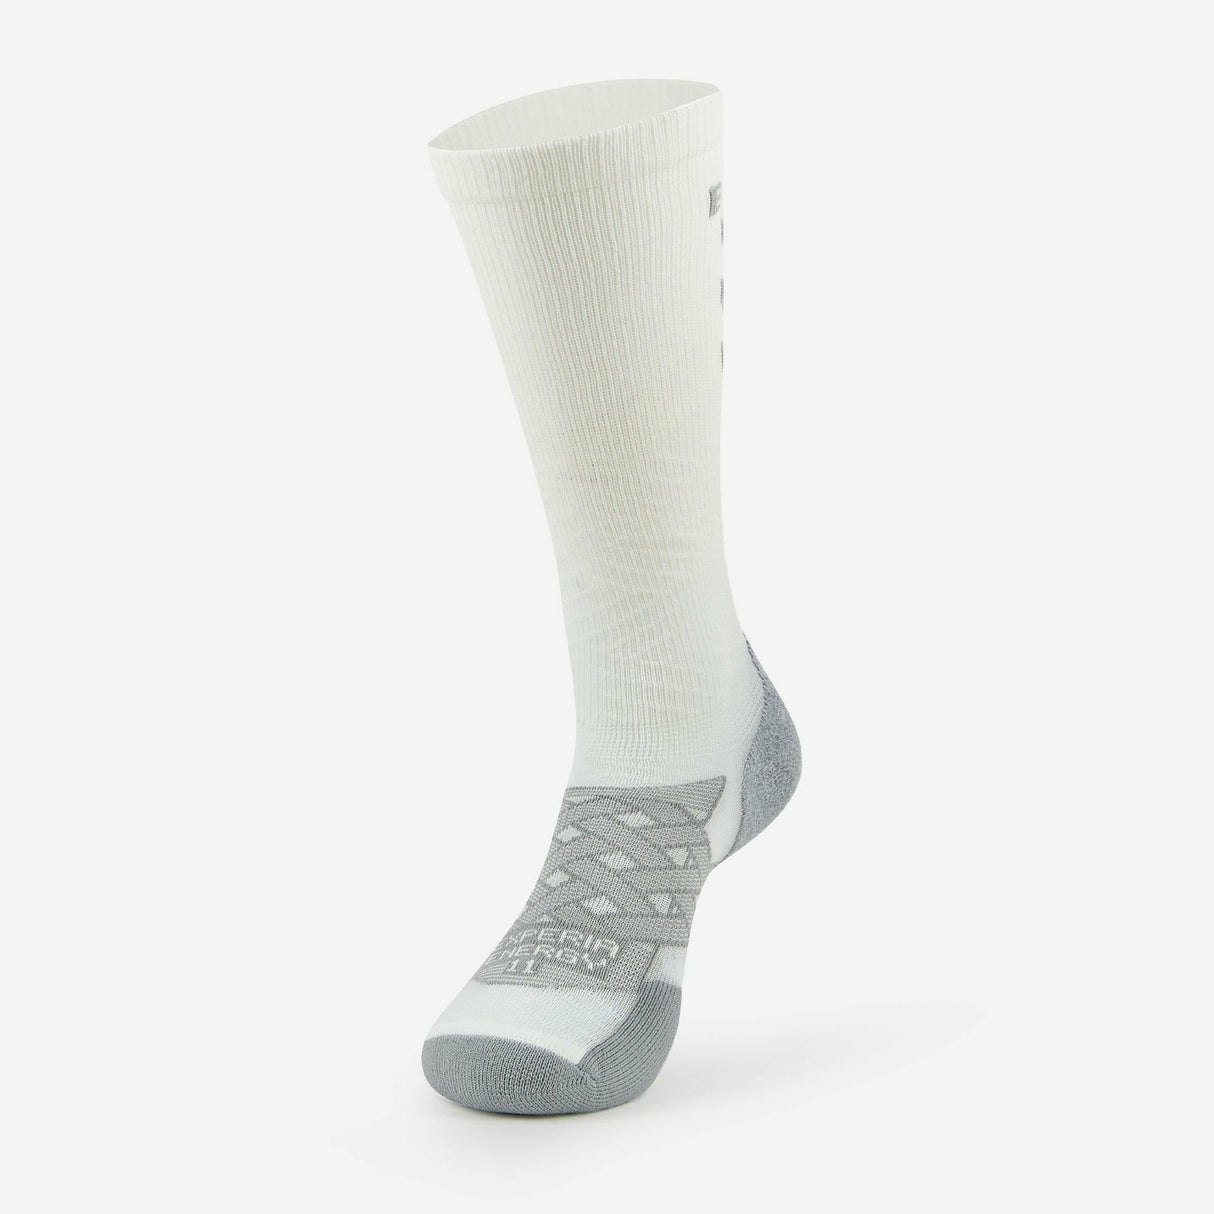 Thorlo Experia Energy Running Light Cushion Over-the-Calf Compression Socks  -  X-Small / White